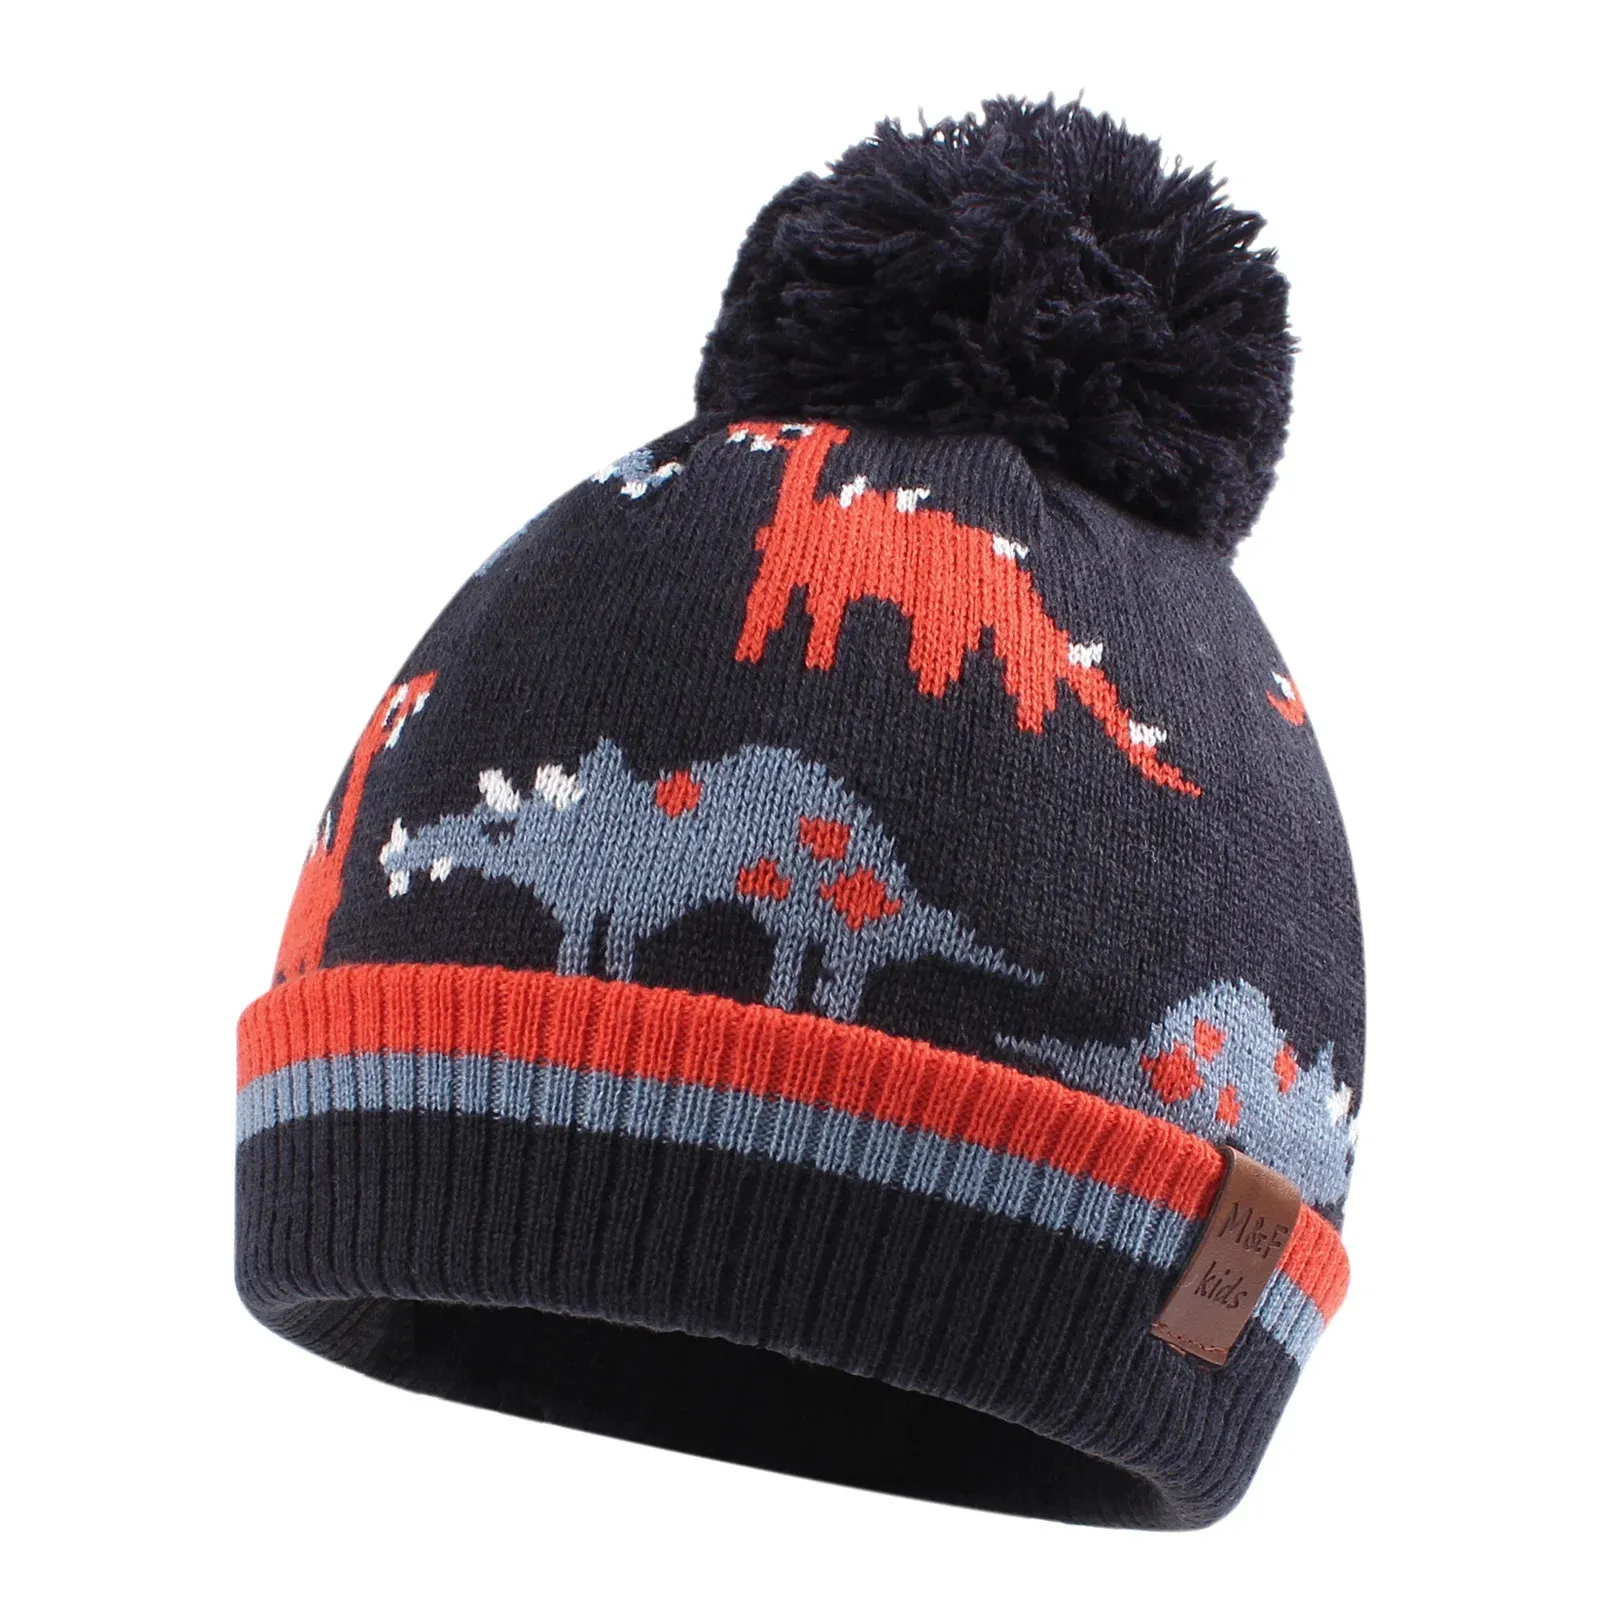 Caps Hats Winter Toddler Boys Dinosaur Hat Autumn Kids Warm Knitted Baby Beanie Fashion Suitable For 2-10 Years Old 231202